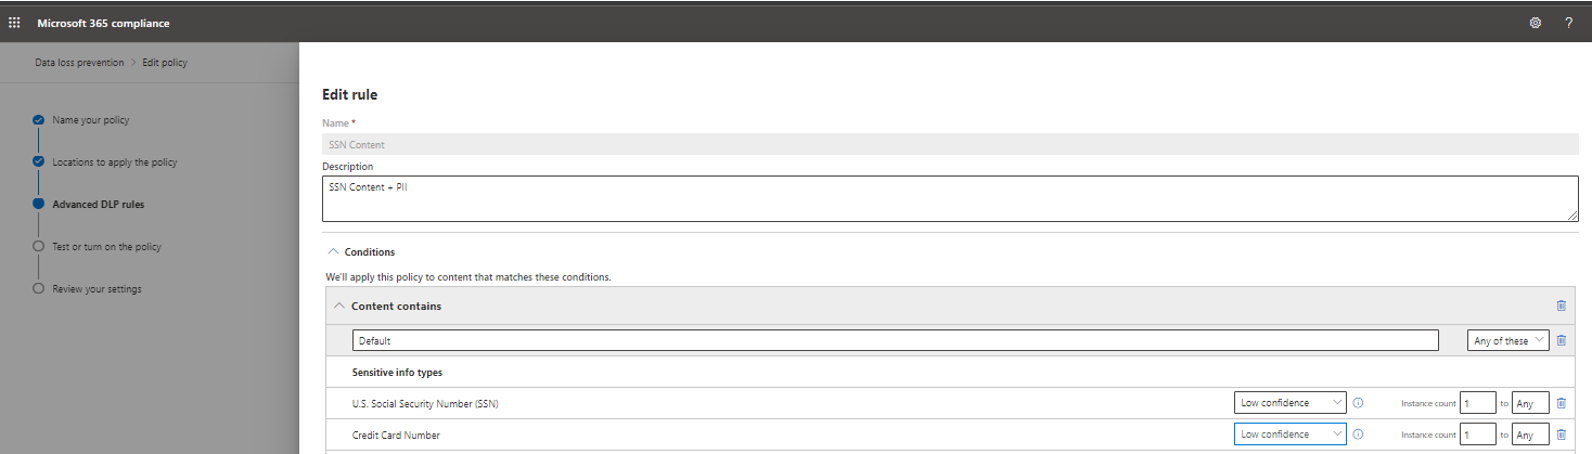 Screenshot of SSN Content rule that is configured to have the detection based on sensitive info types.